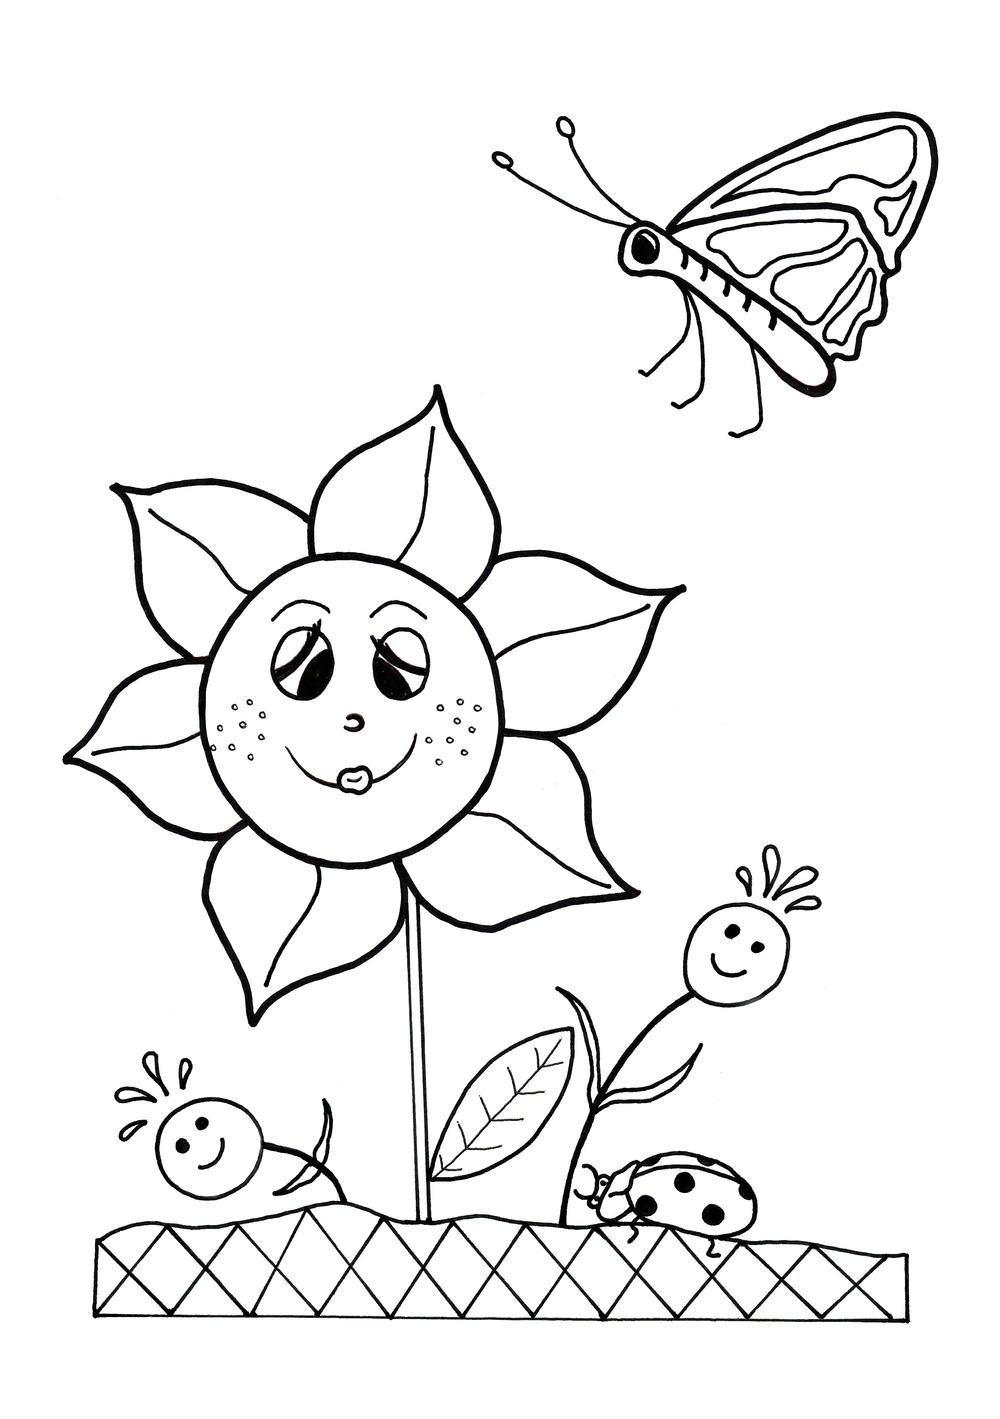 Printable Spring Coloring Pages
 Dancing Flowers Spring Coloring Sheet